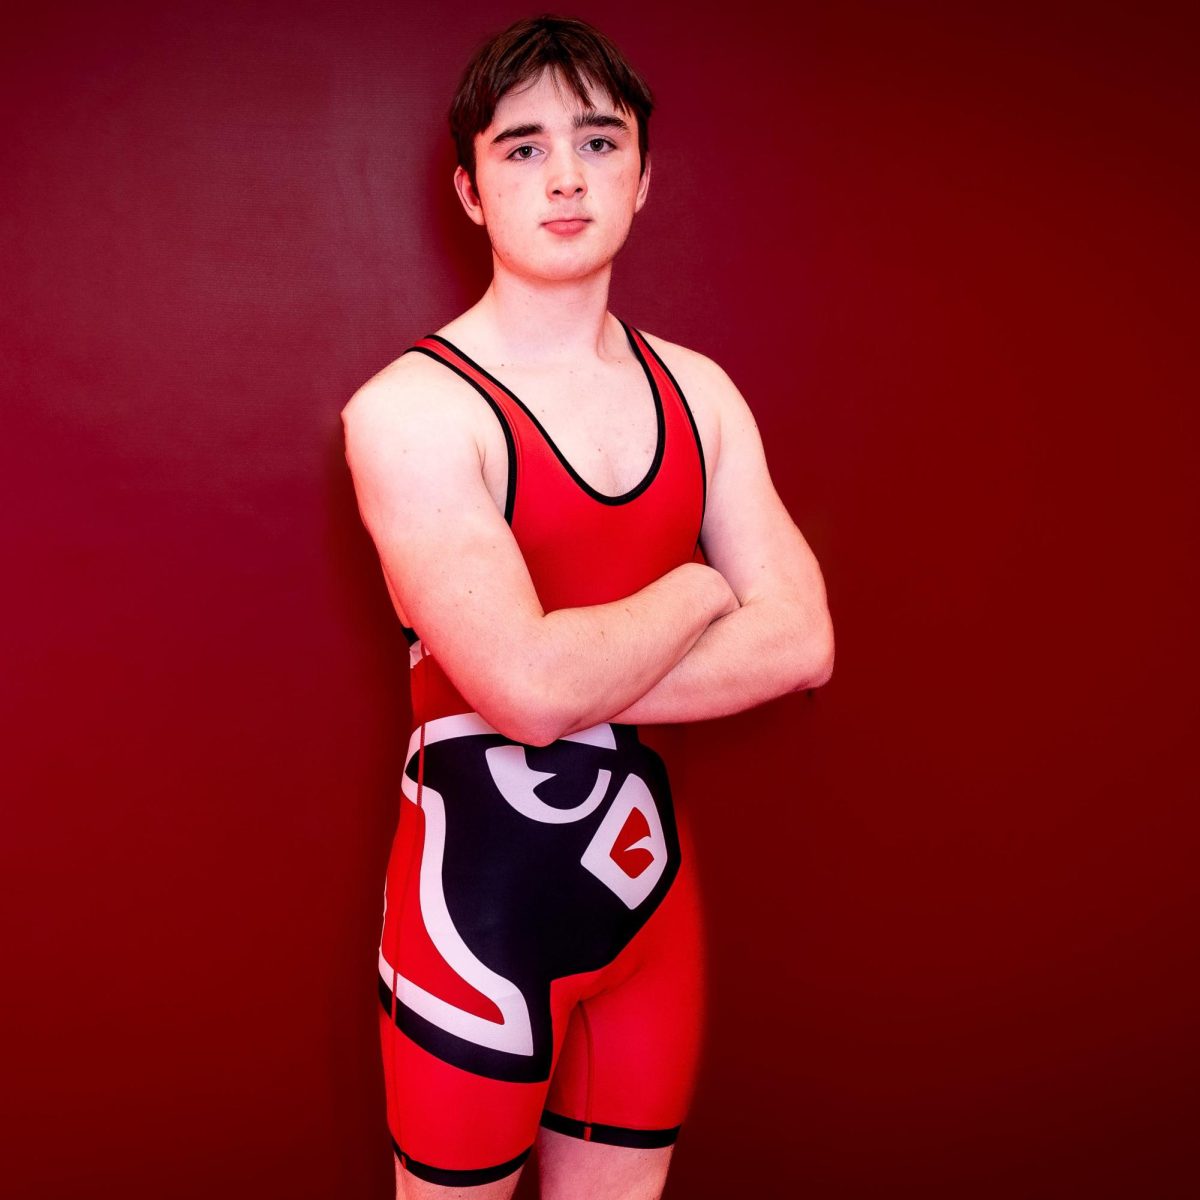 Central+Catholic+sophomore+Connor+Donegan+poses+in+a+Lincoln+singlet.+Despite+attending+Central+Catholic%2C+he+wrestles+for+Lincoln.